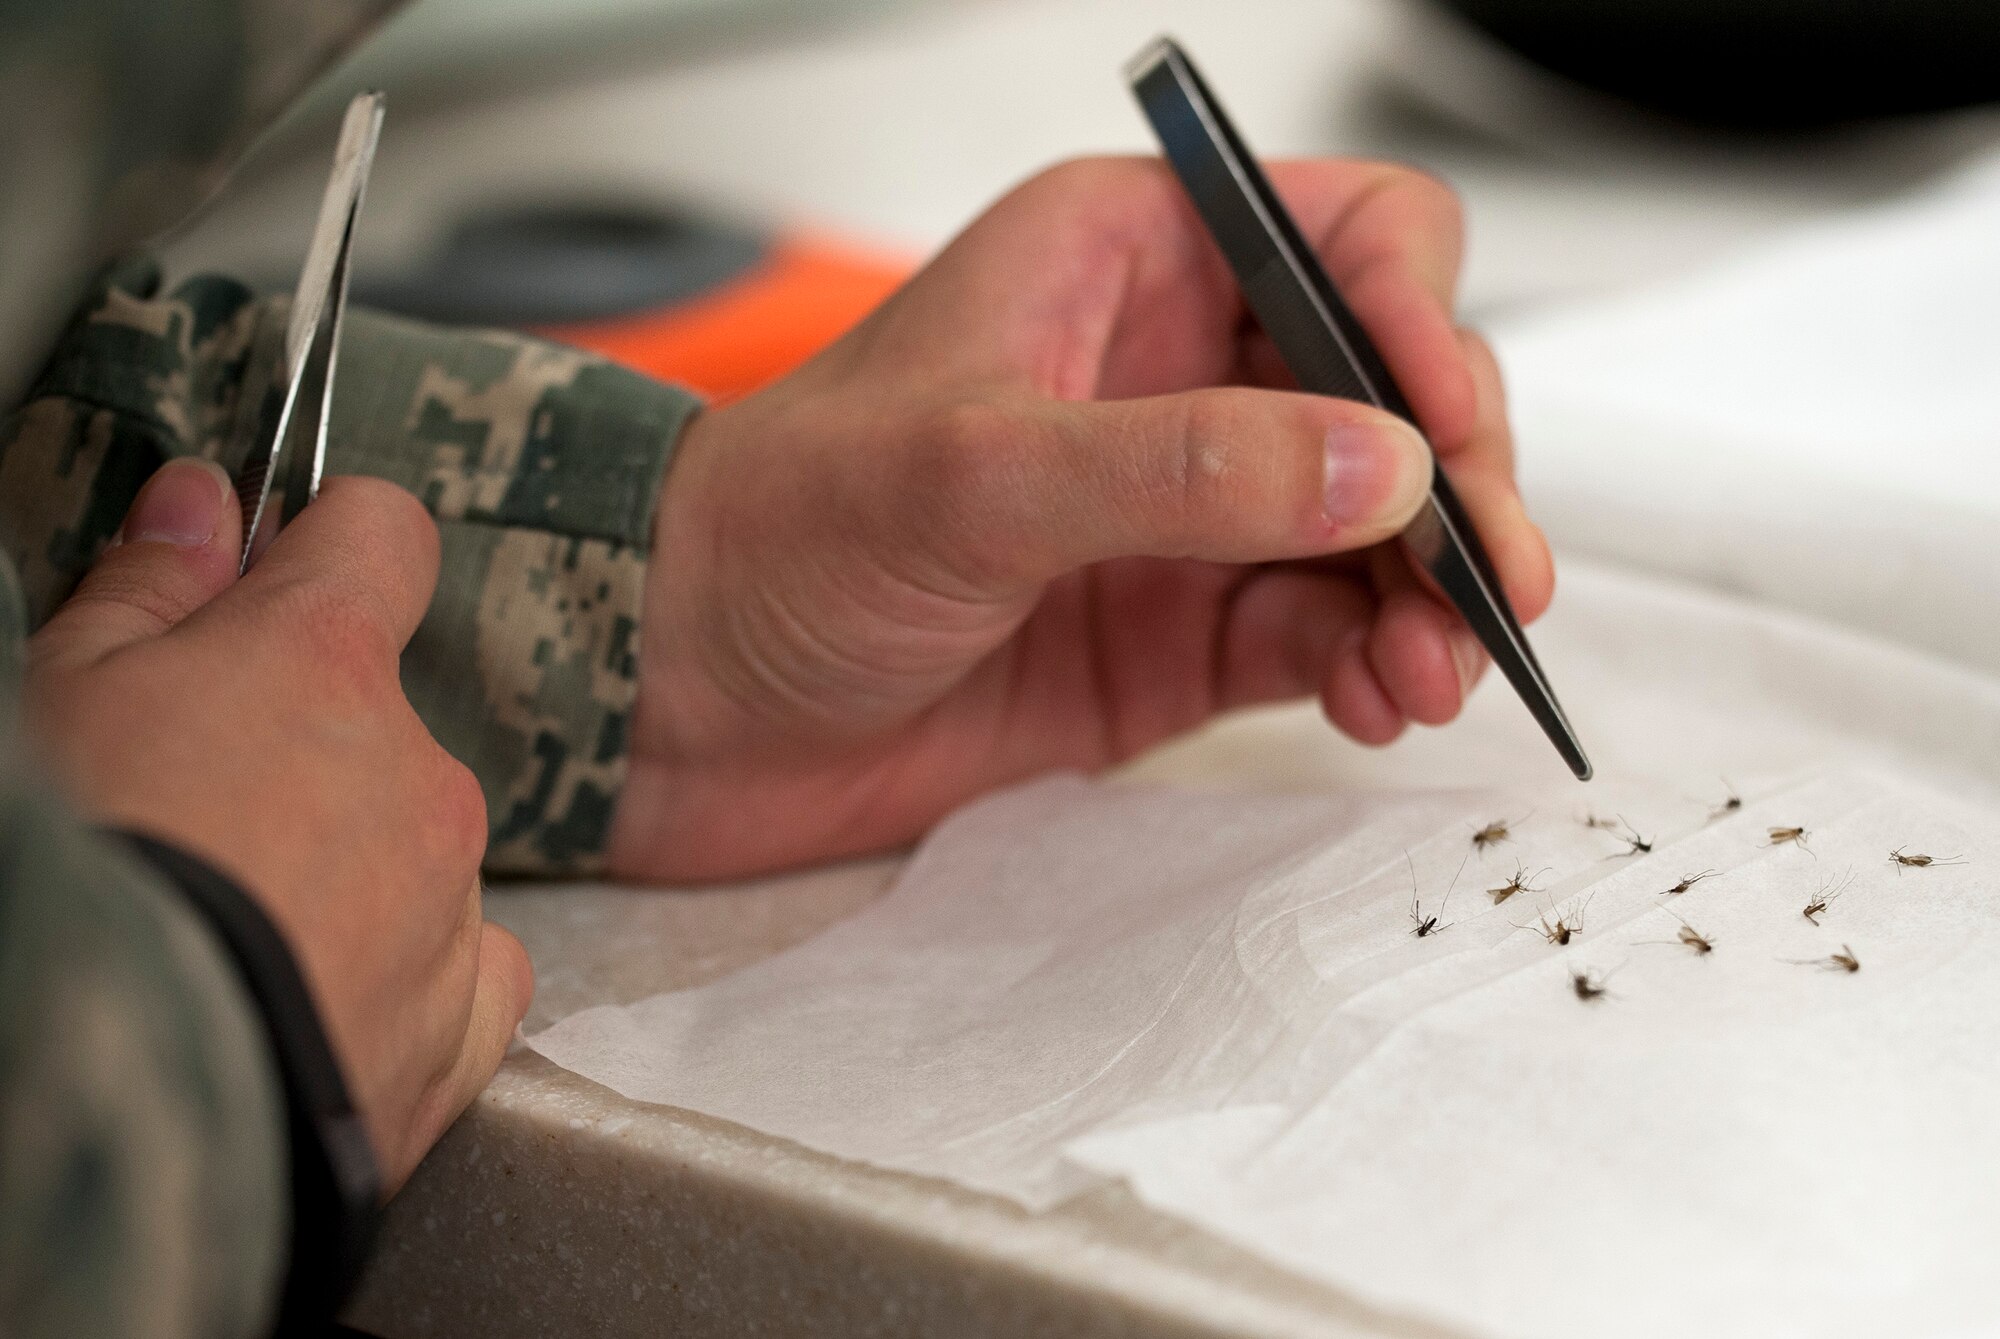 Airman Kristina Dugan, 96th Aerospace Medicine Squadron public health technician, counts and logs mosquitoes July 20 at Eglin Air Force Base, Fla. The information gathered from catching mosquitoes establishes baseline catch counts for several base locations. This helps the 96th Civil Engineer Group’s Pest Management Division determine the effectiveness of their mosquito control methods. The information is also shared with local and state health authorities. (U.S. Air Force photo/Ilka Cole)